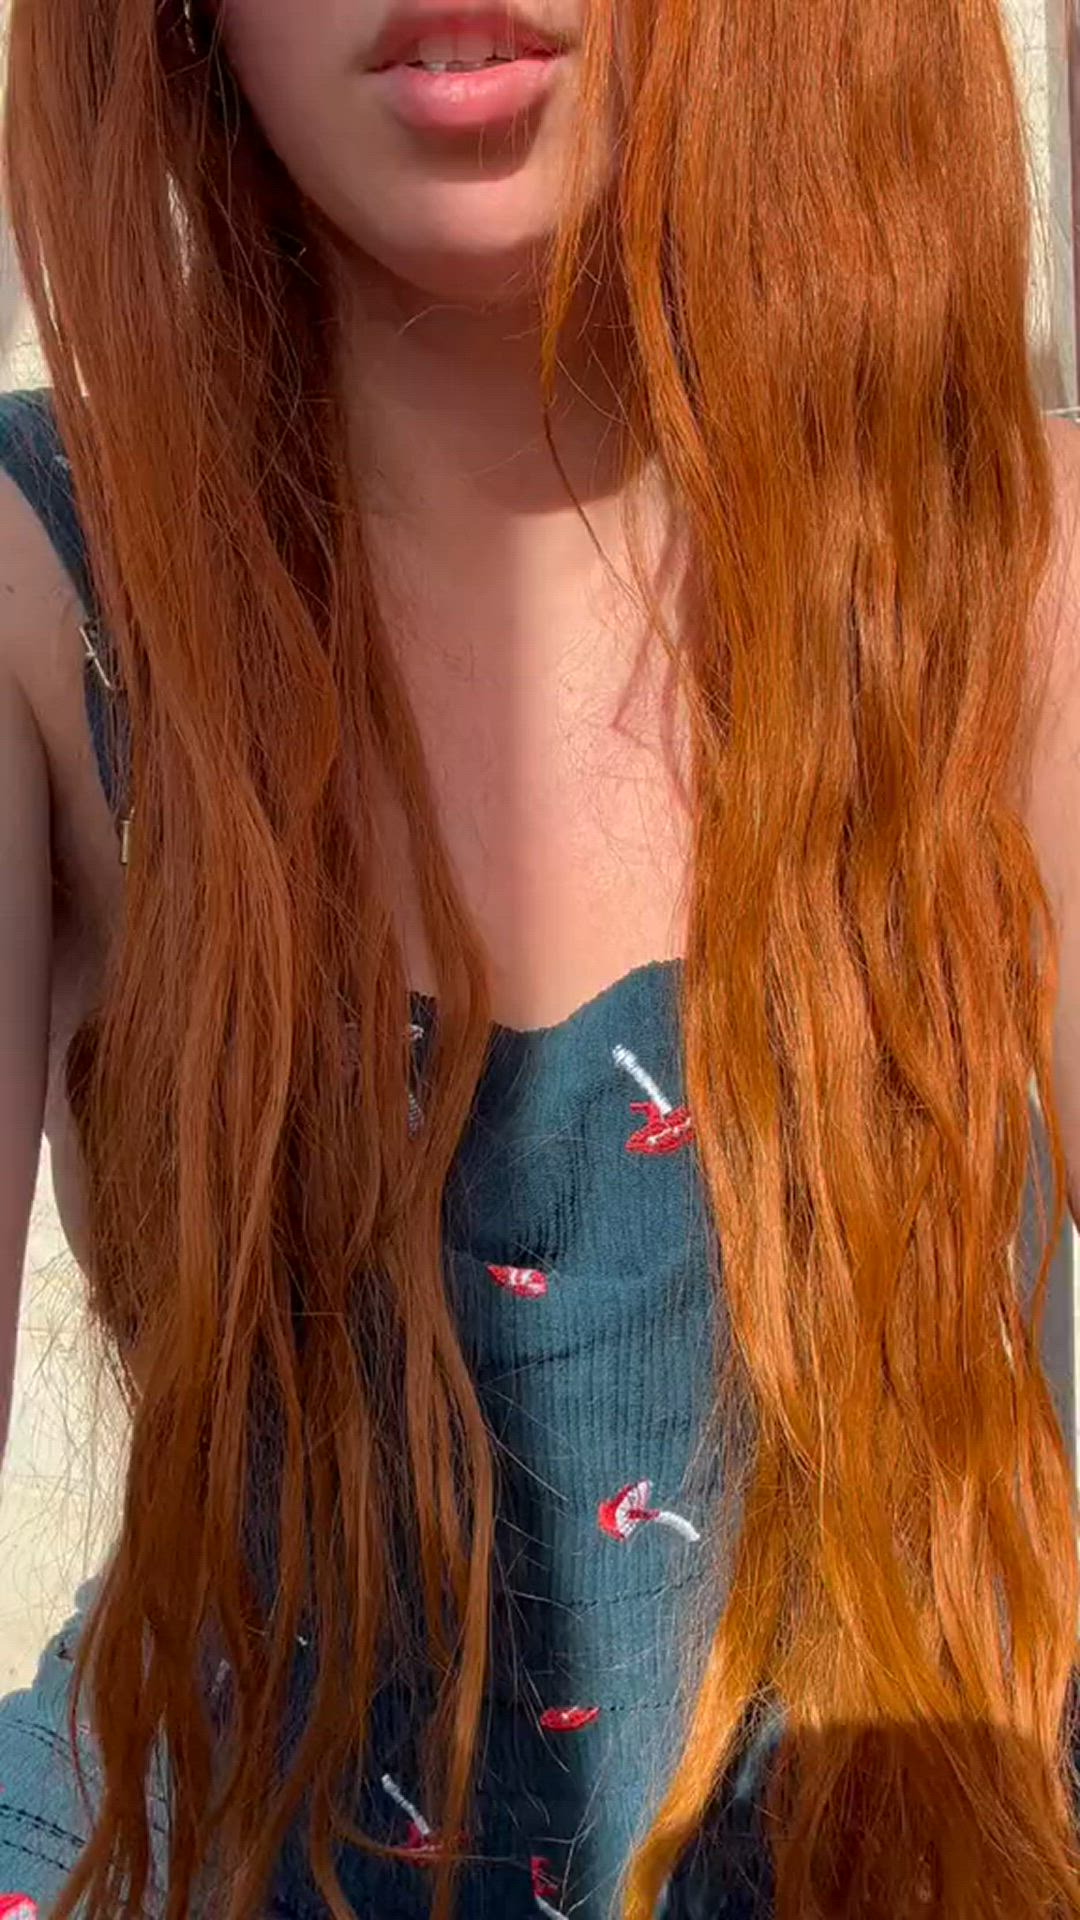 Hairy porn video with onlyfans model daydreamredhead <strong>@daydreamredhead</strong>